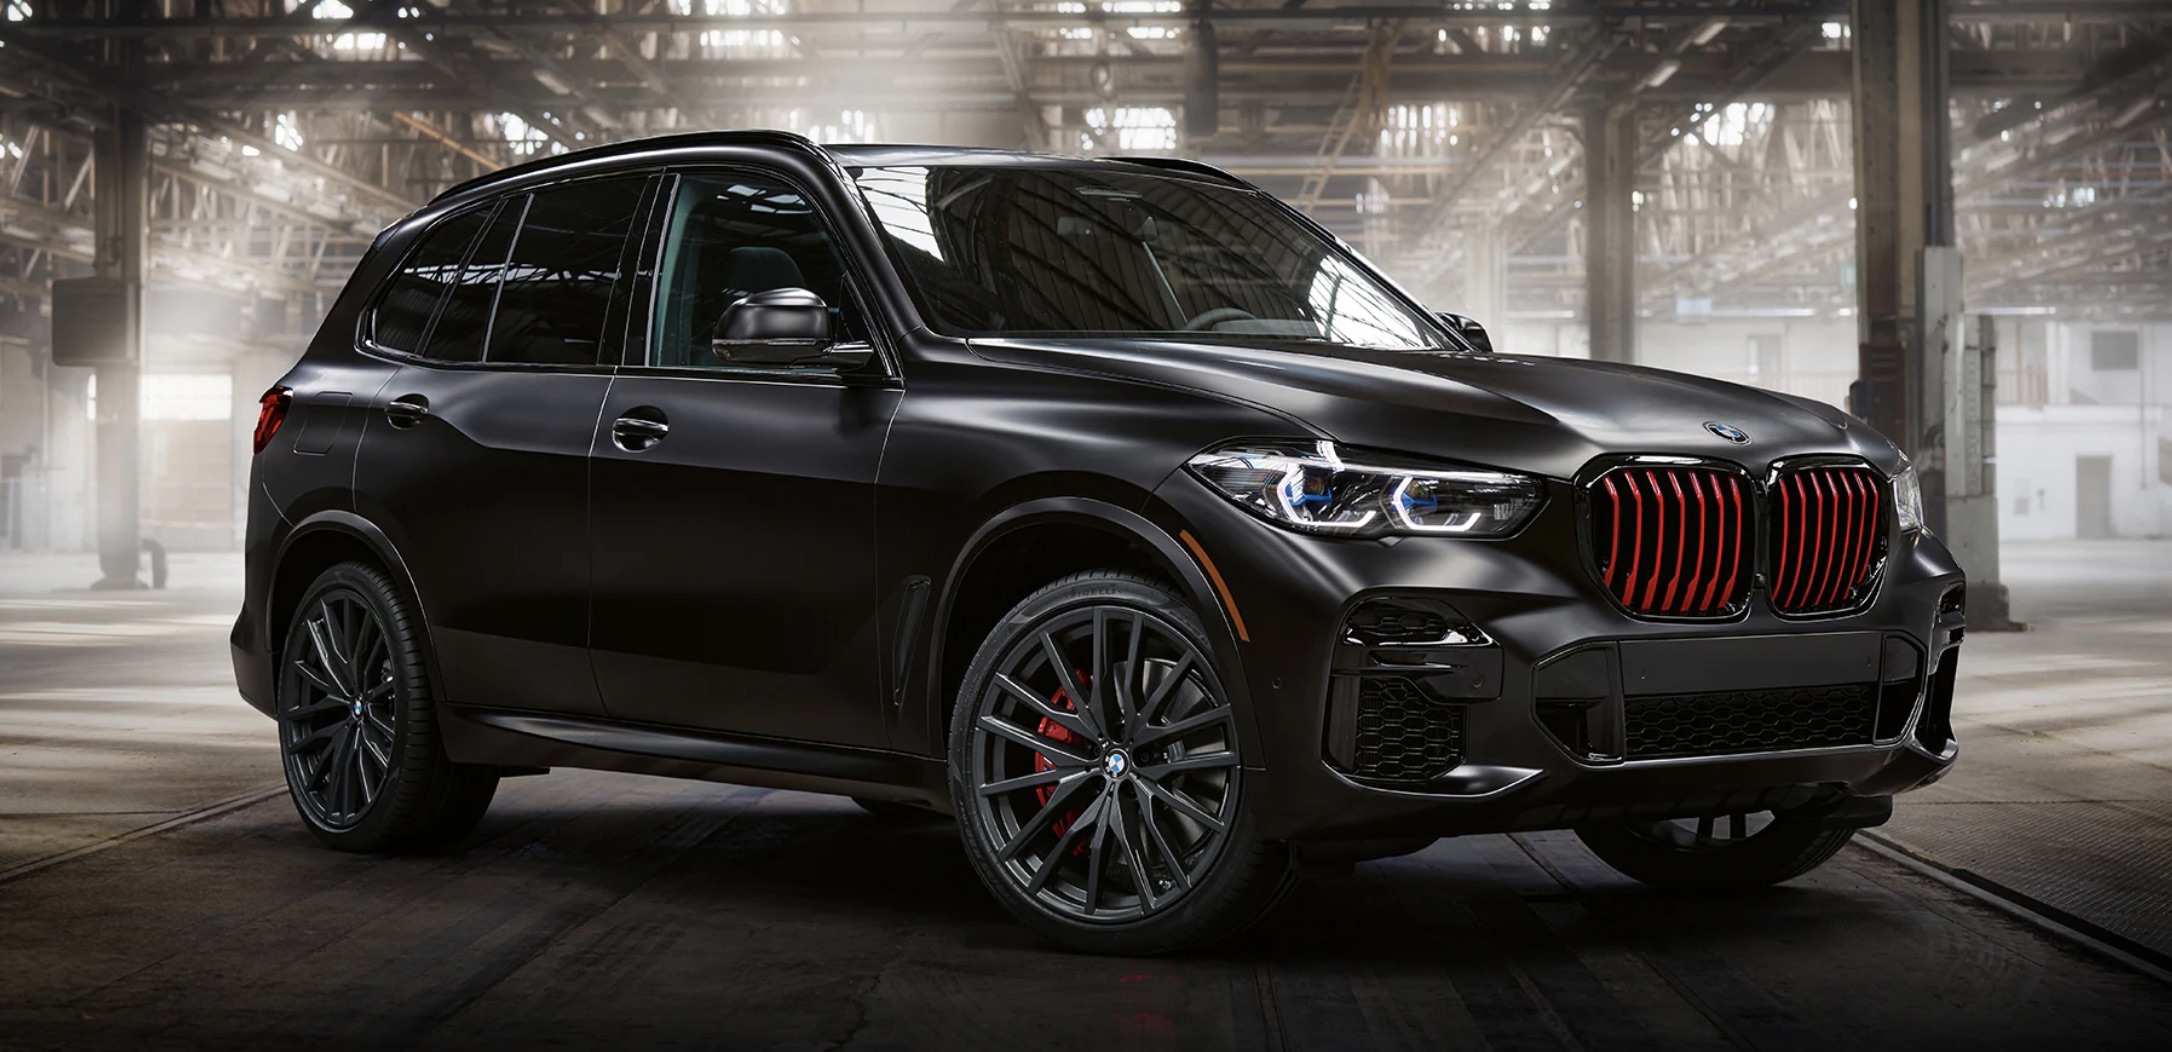 New Features For The 2022 BMW X5 - Bachrodt BMW Blog